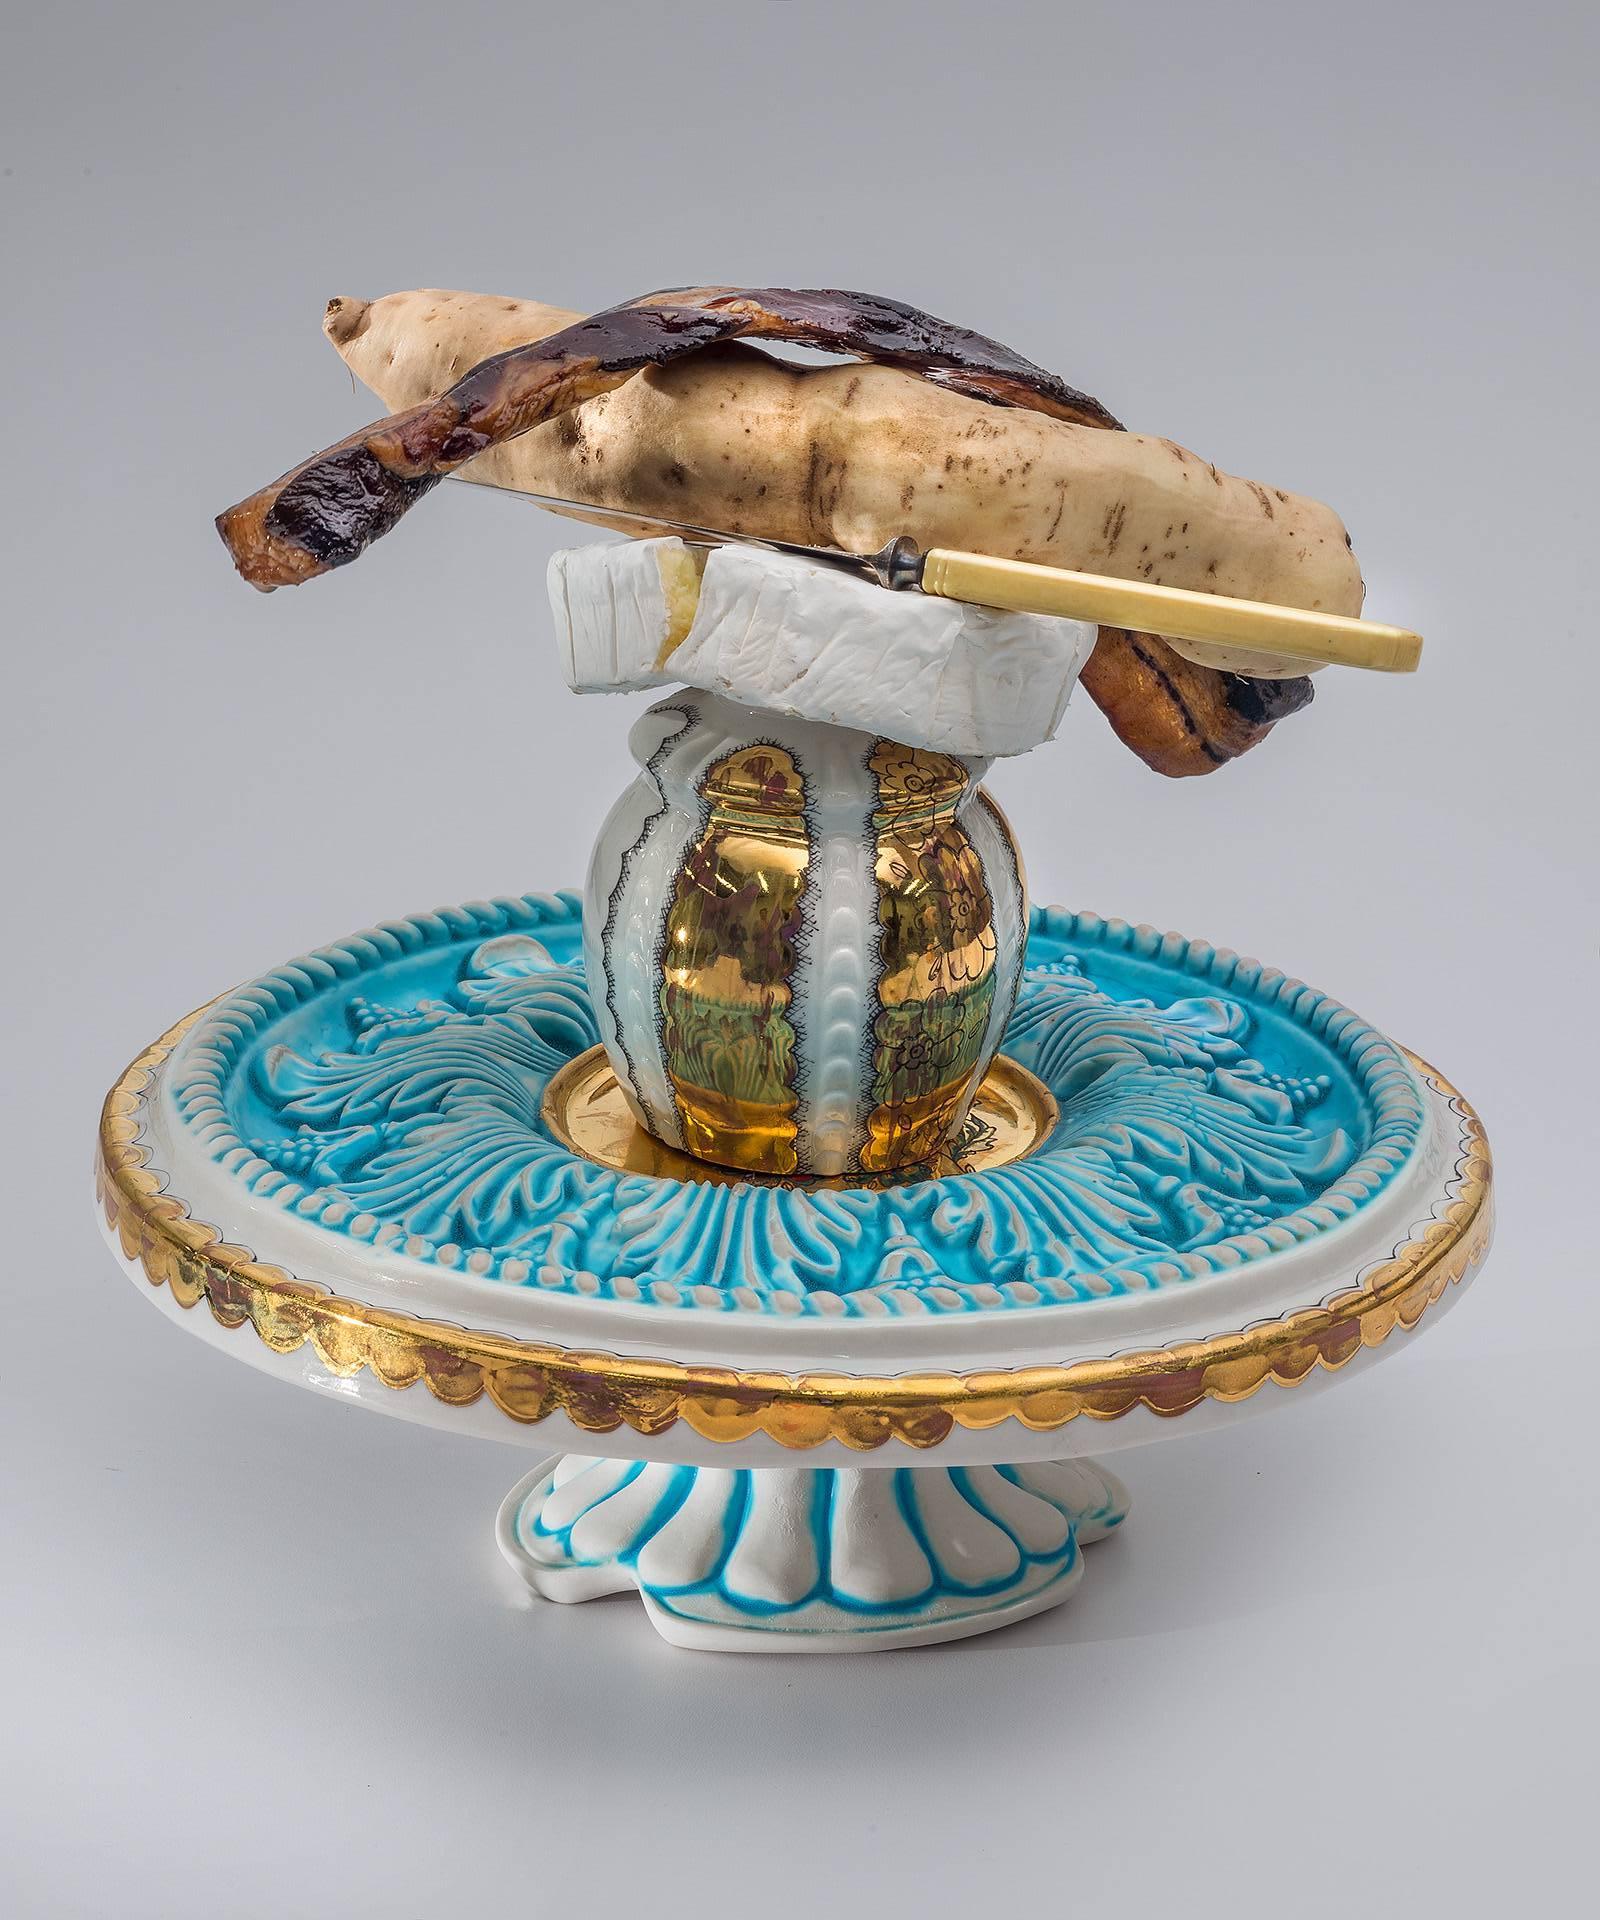 Memento Mori - Cake Stand, Cup, Bacon, Vegetable & Brie - Photograph by Melanie Sherman